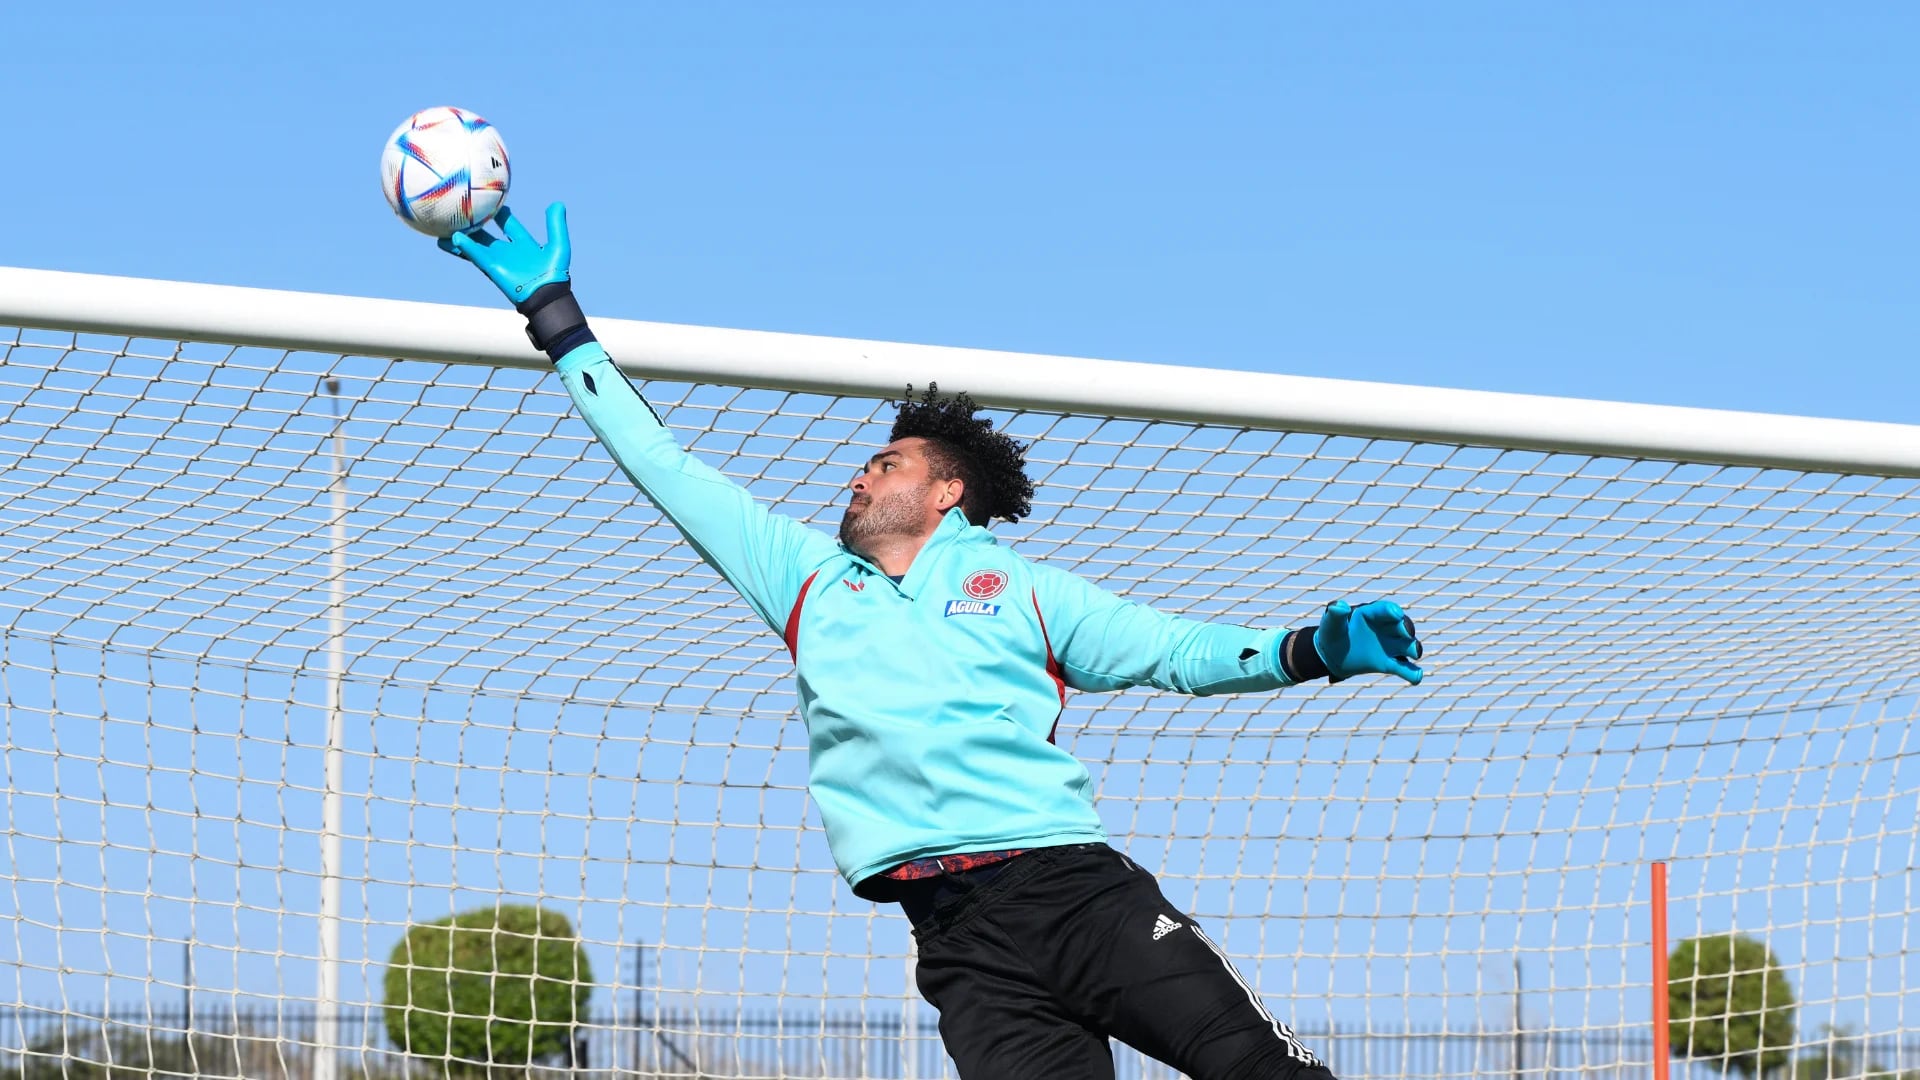 Goalkeeper Álvaro Montero is one of the Colombian soccer players who could be called up for dates 3 and 4 of the South American Qualifiers - FCF credit.